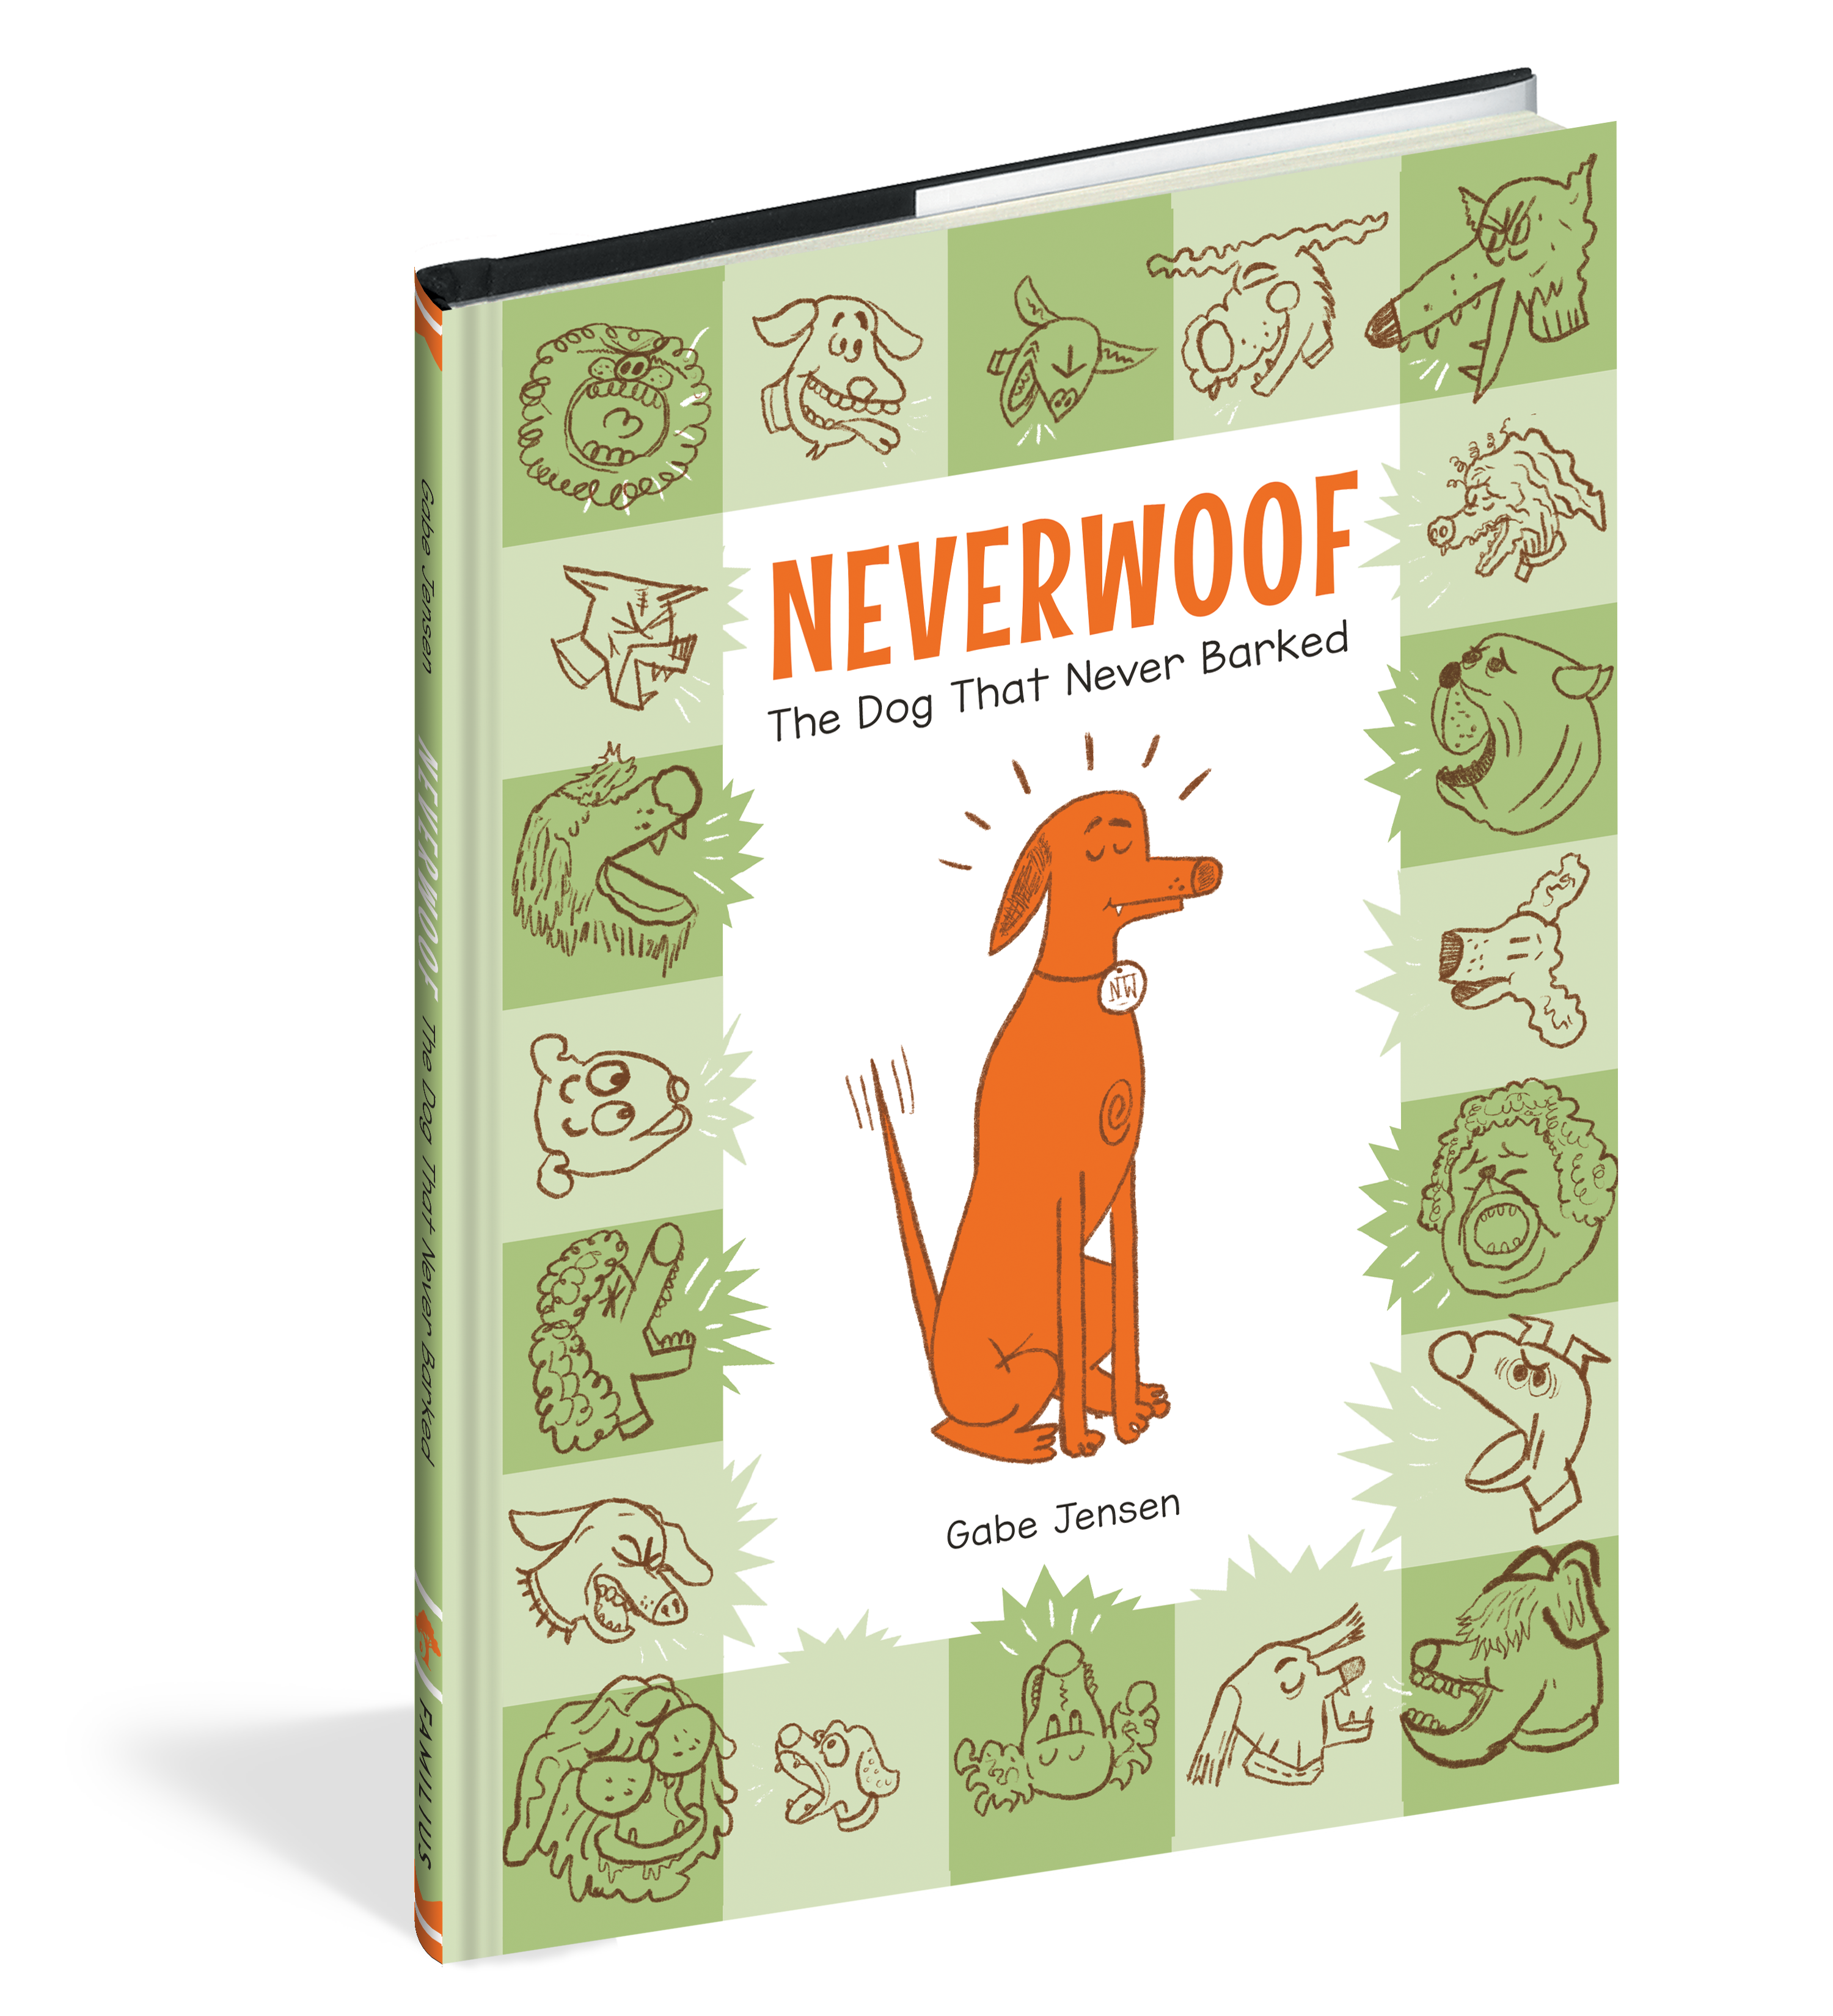 The cover of the picture book Neverwoof.